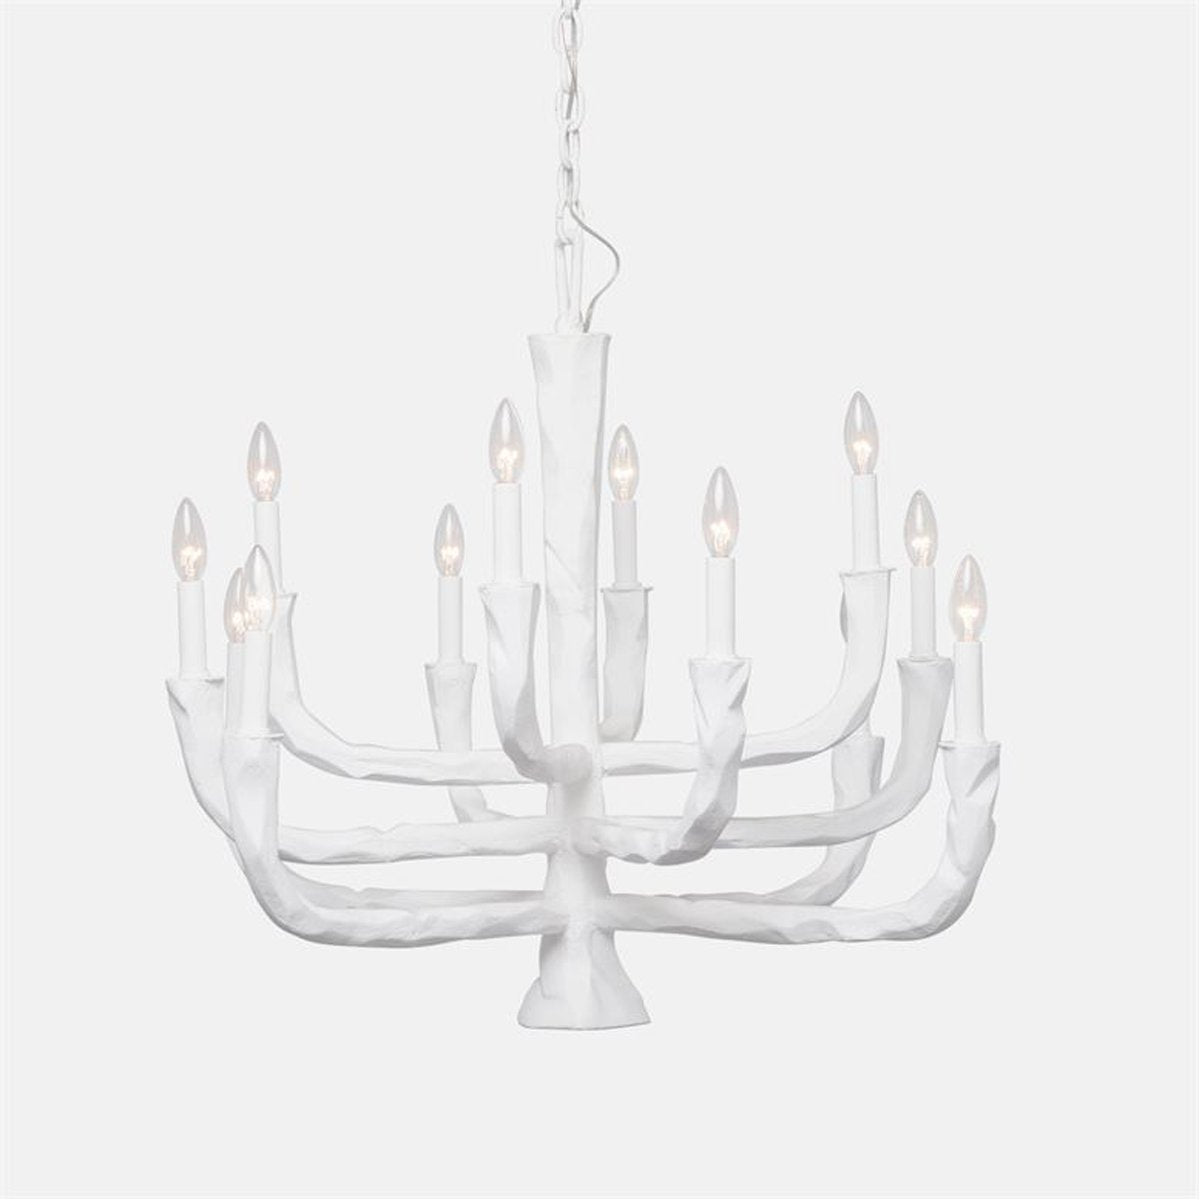 Made Goods Fawn Concrete Branches Chandelier